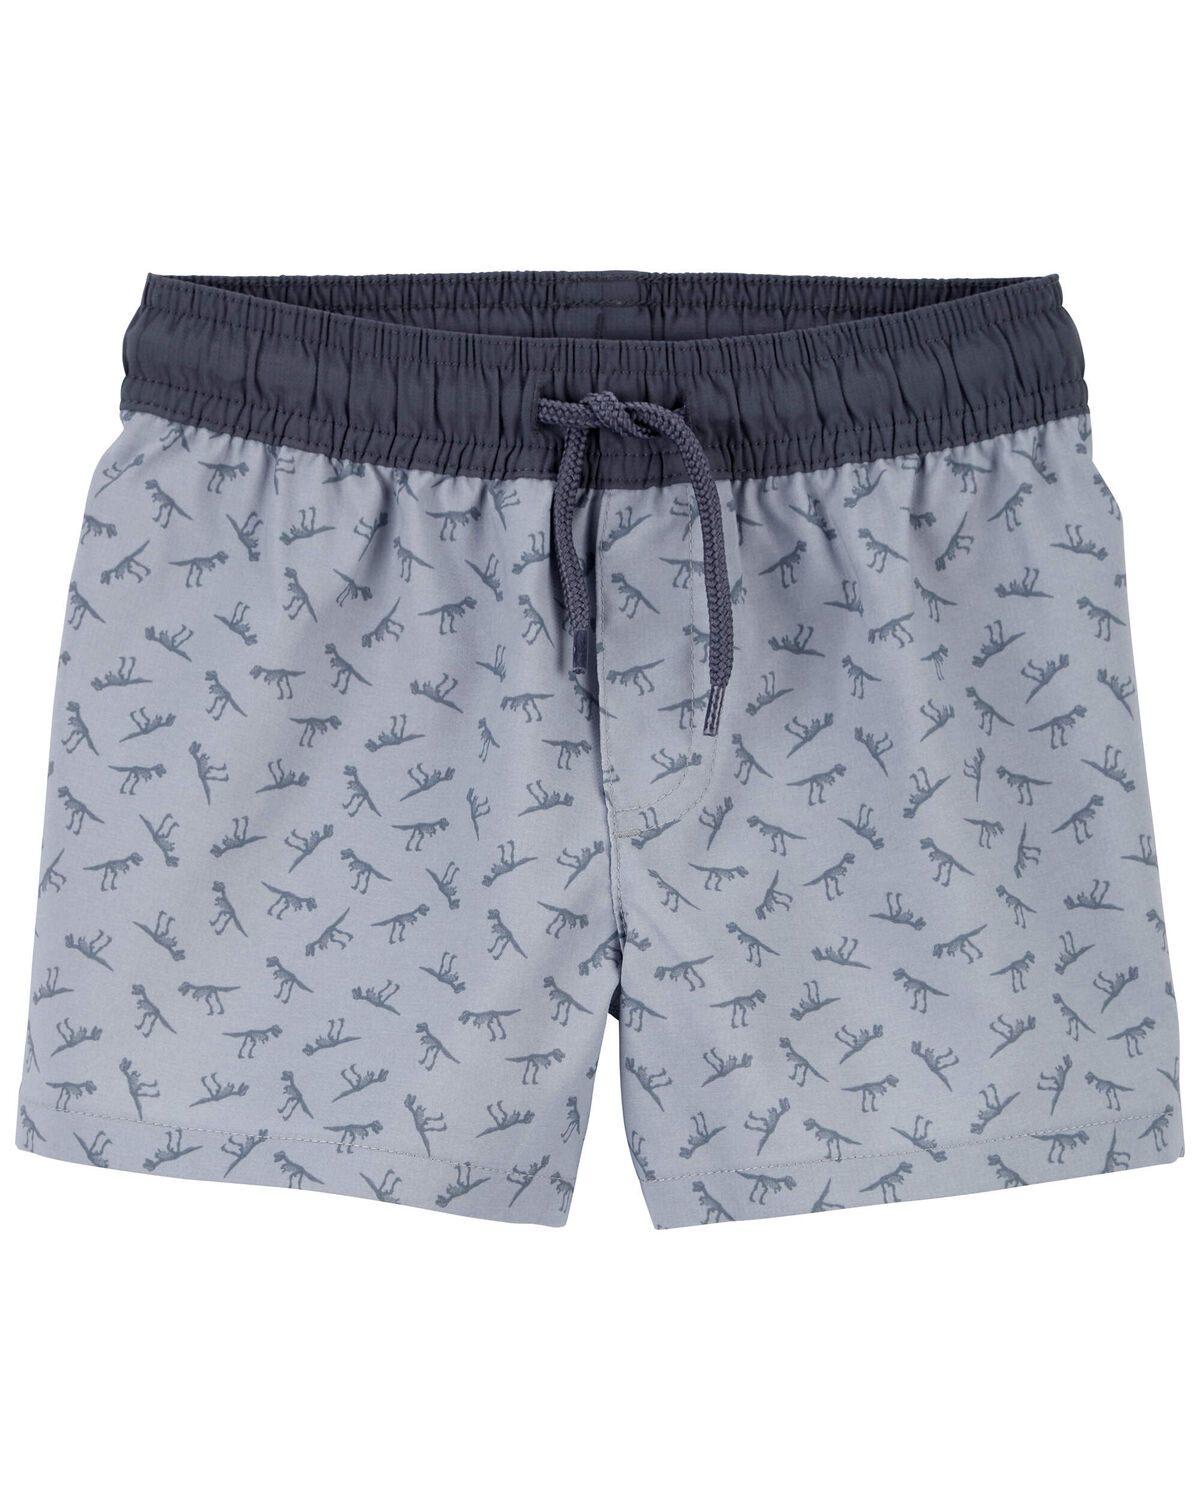 Toddler Dino Print Active Shorts in Moisture Wicking Fabric 